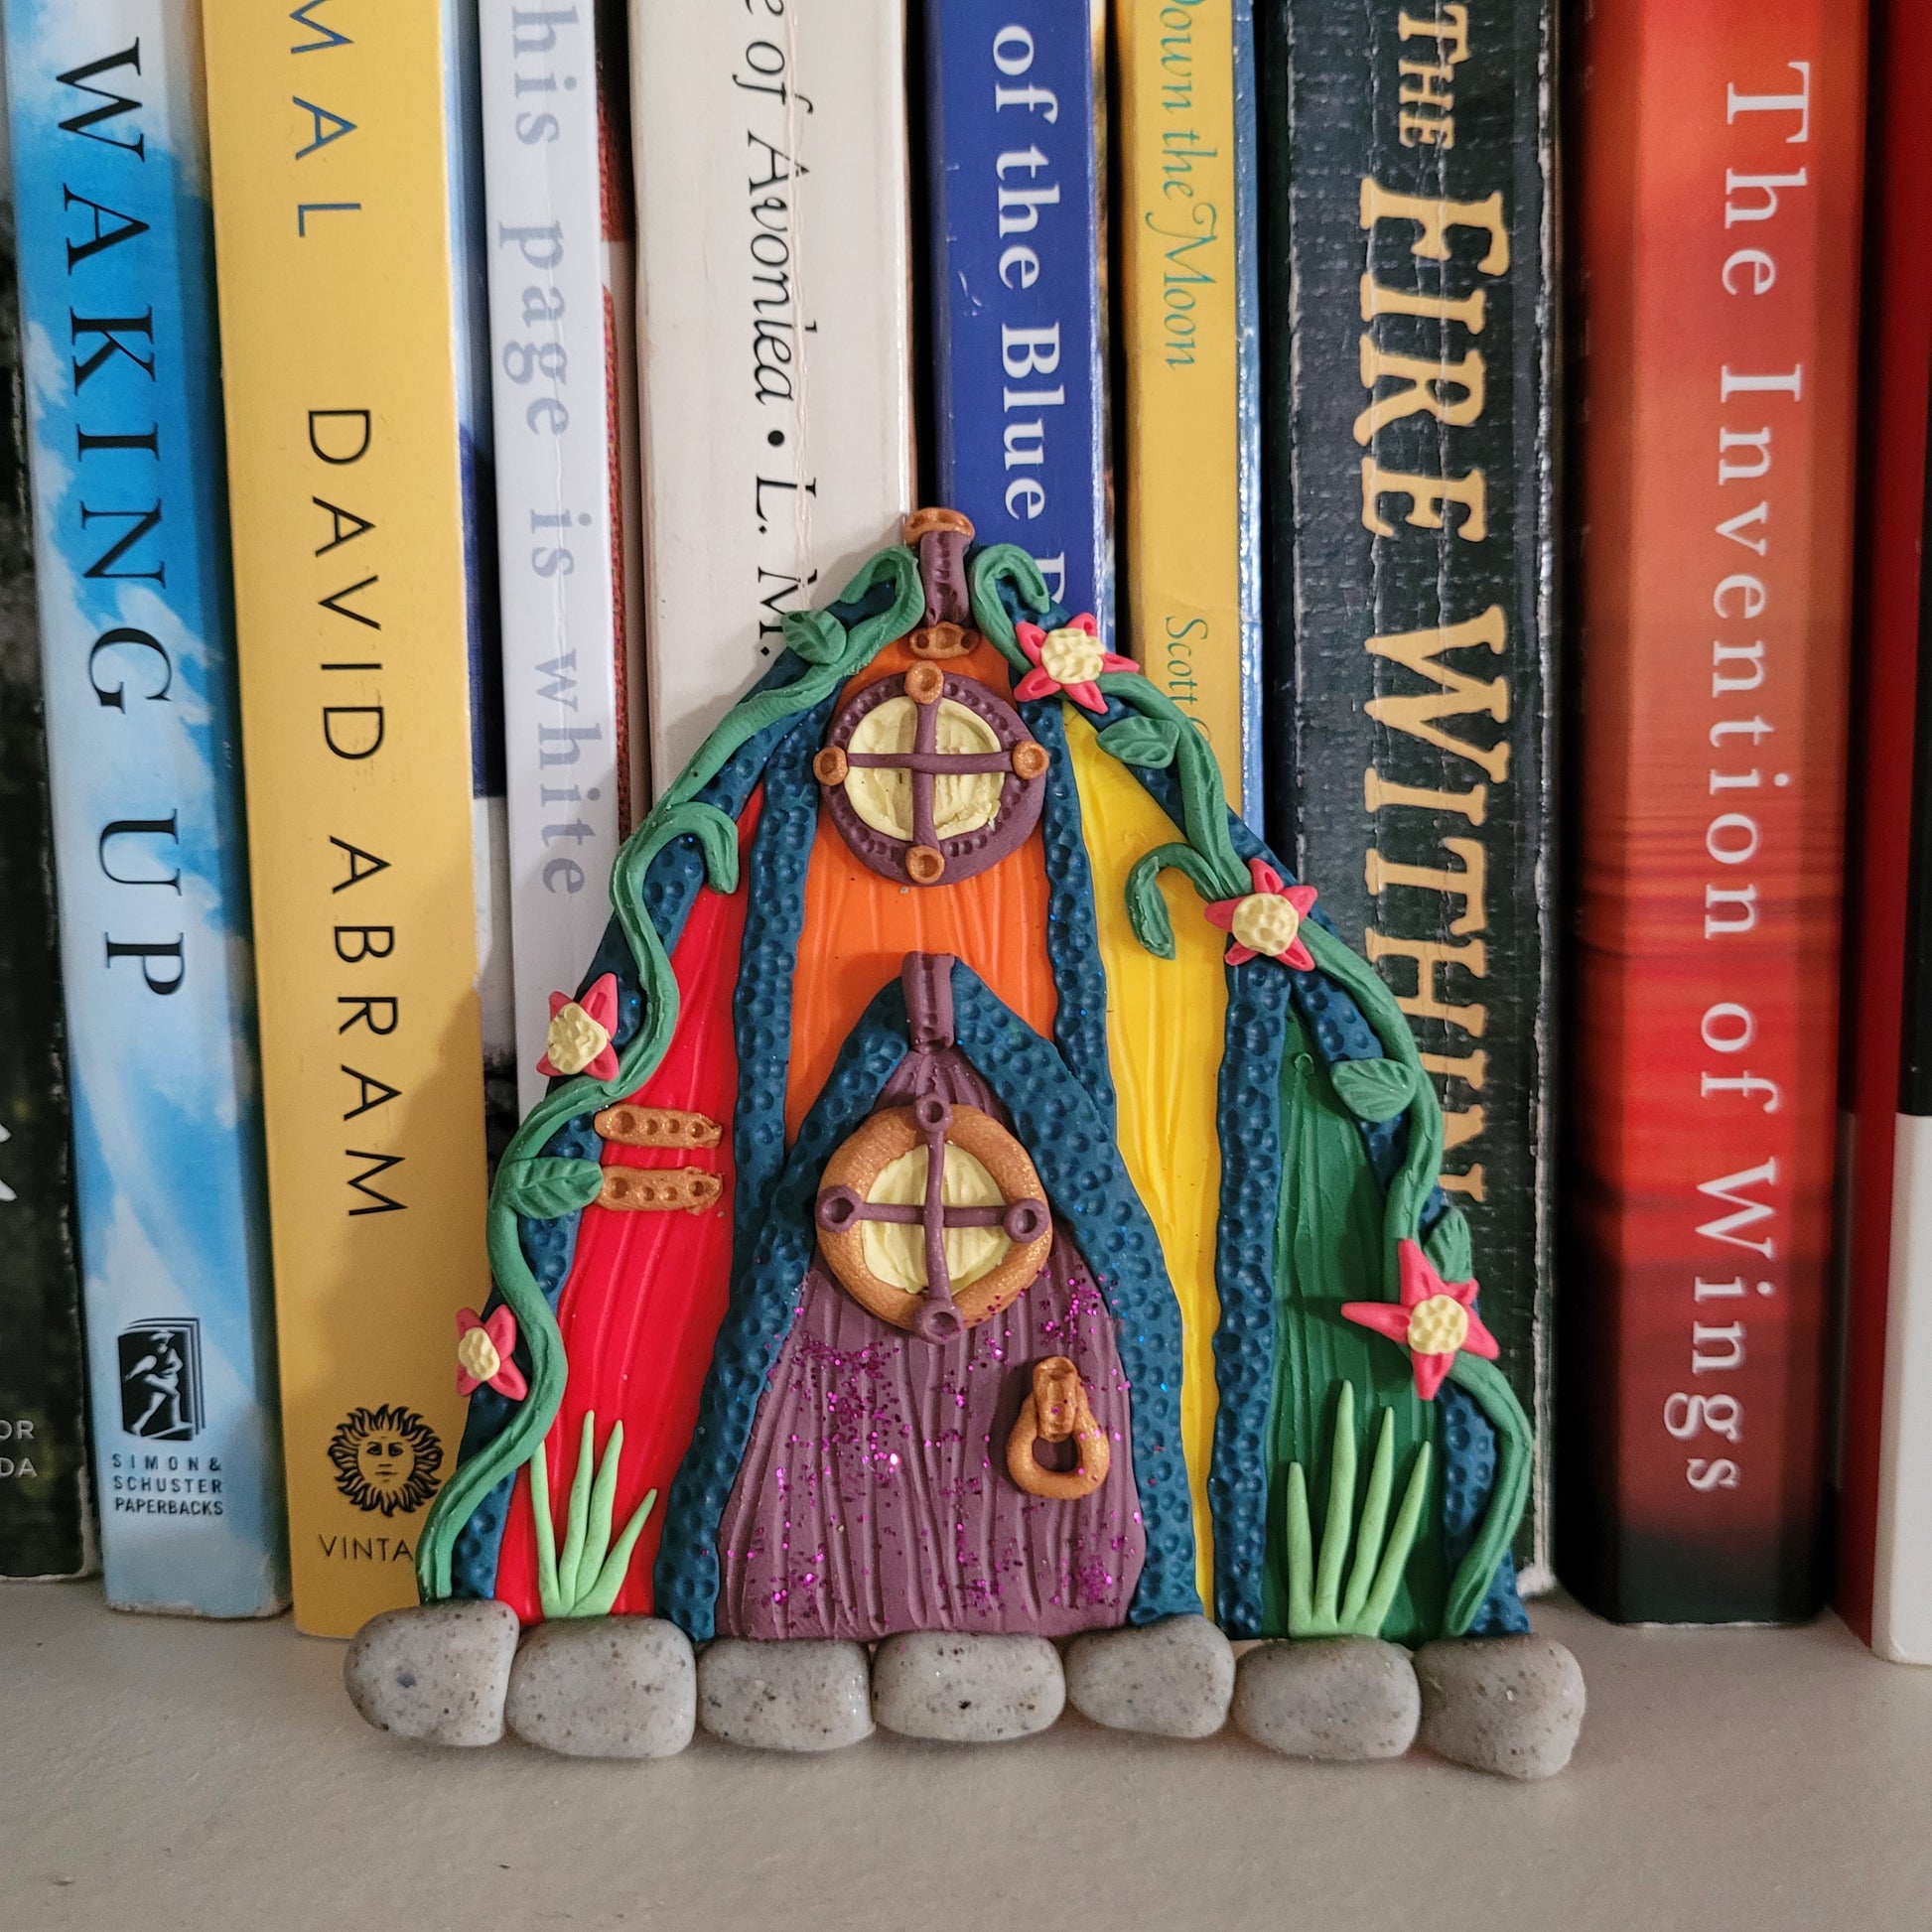 The Pride fairy door is rainbow colored and rests against a shelf of colorful books as the perfect decor.